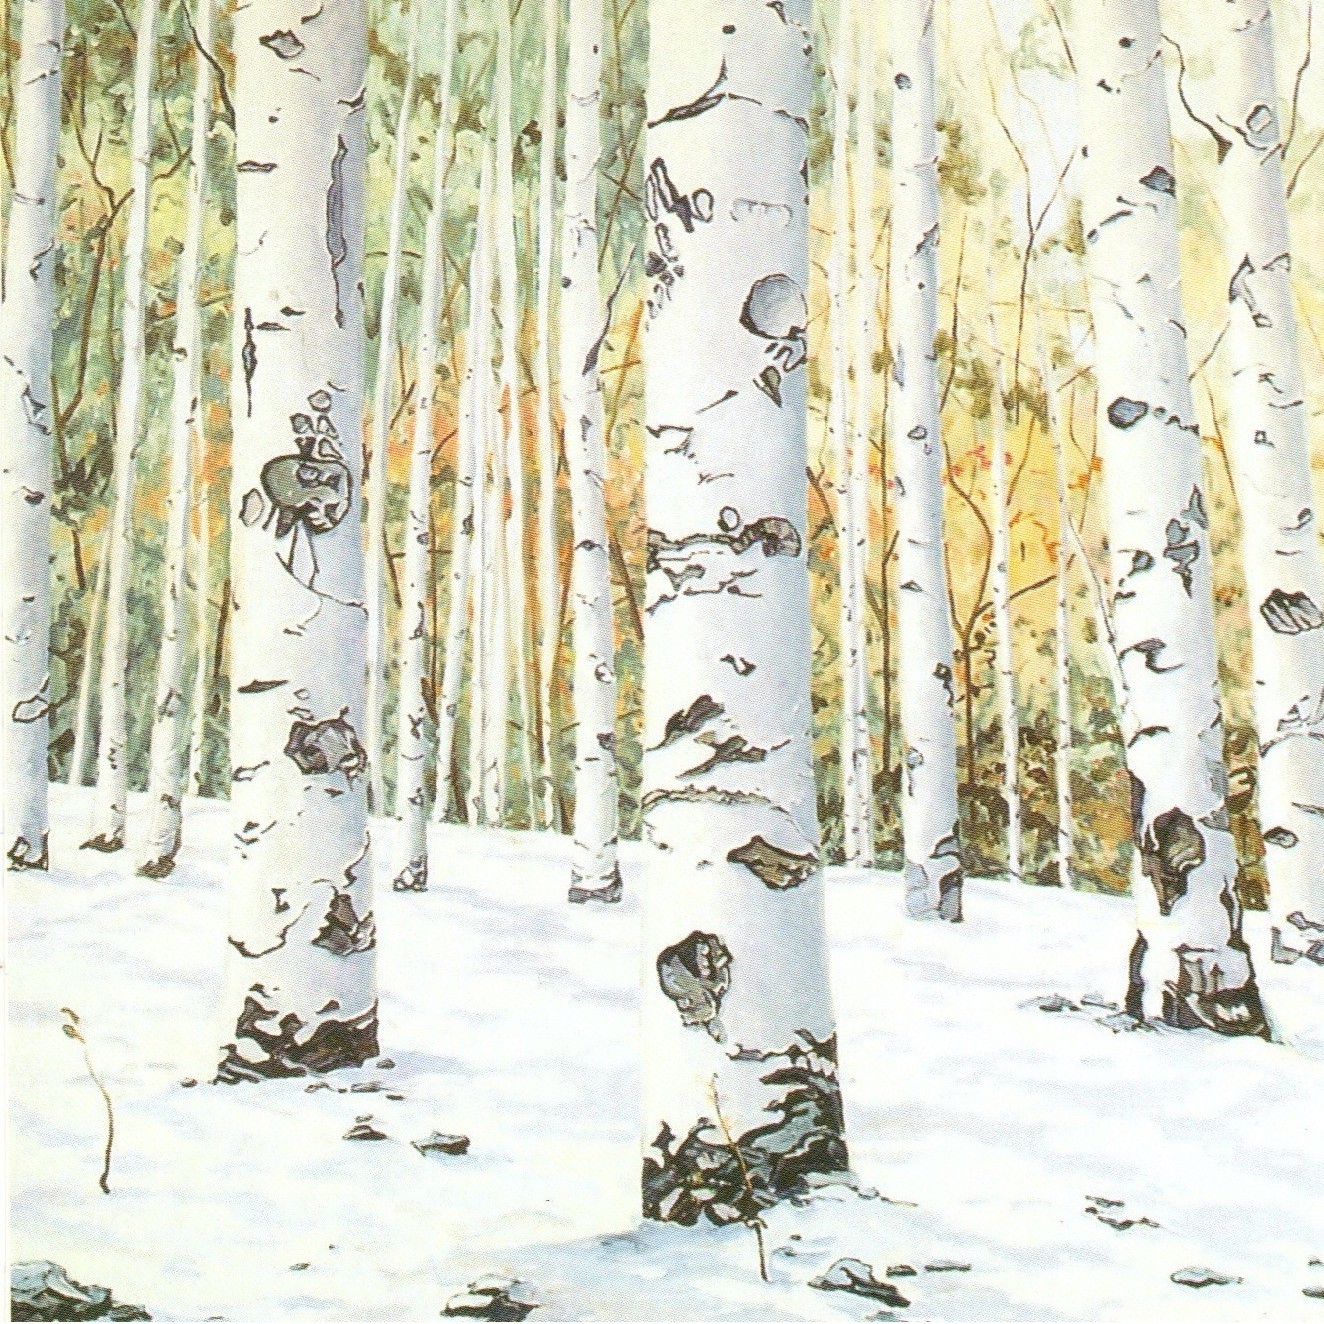 "Birches on a Slope #3" by Shain Bard